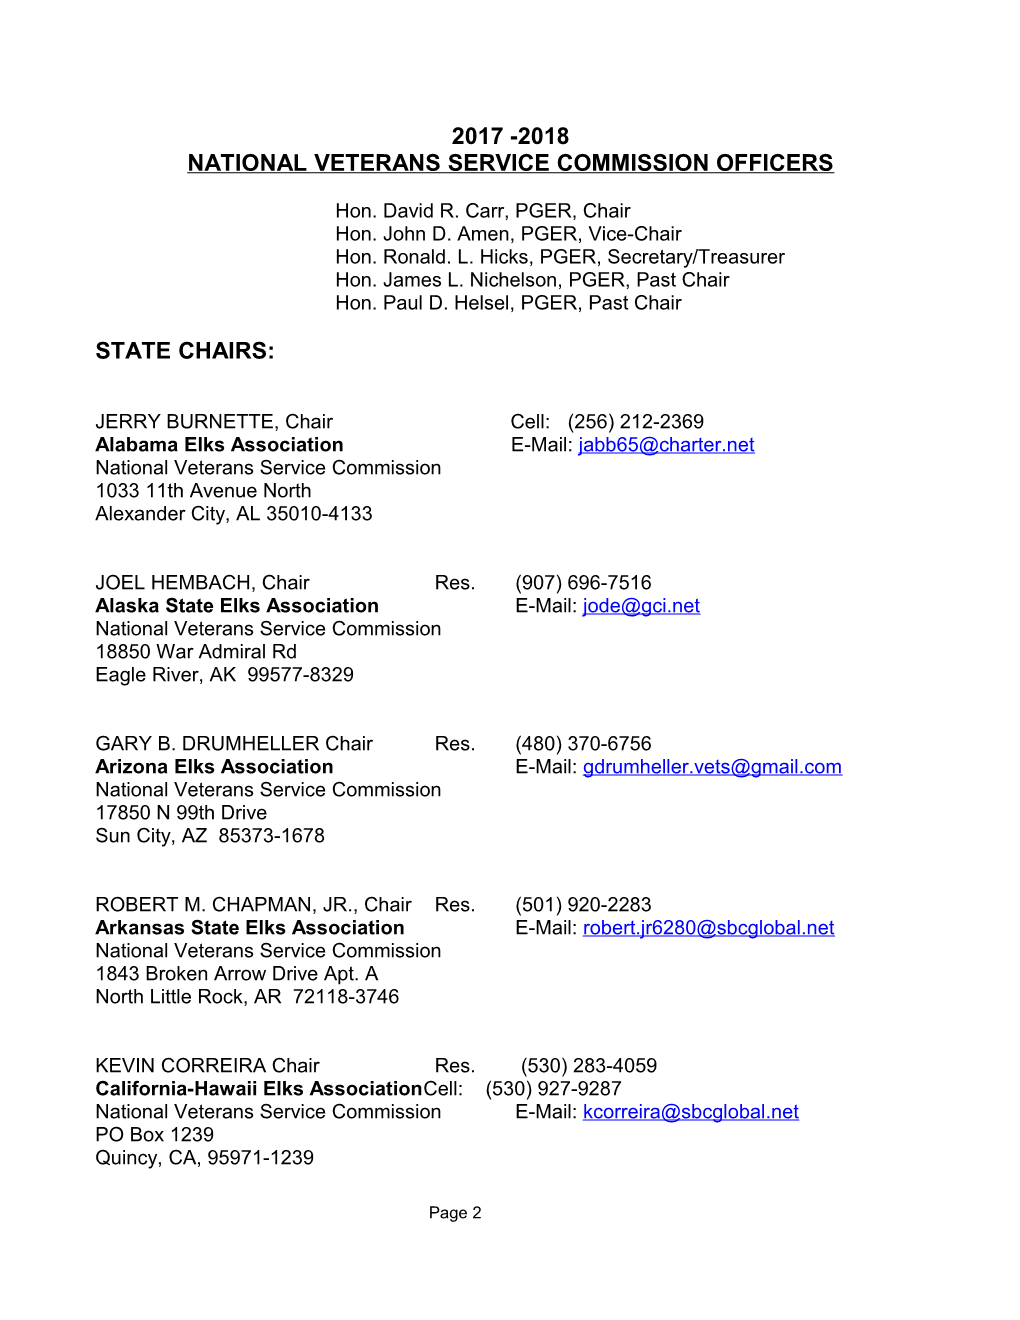 National Veterans Service Commission Officers